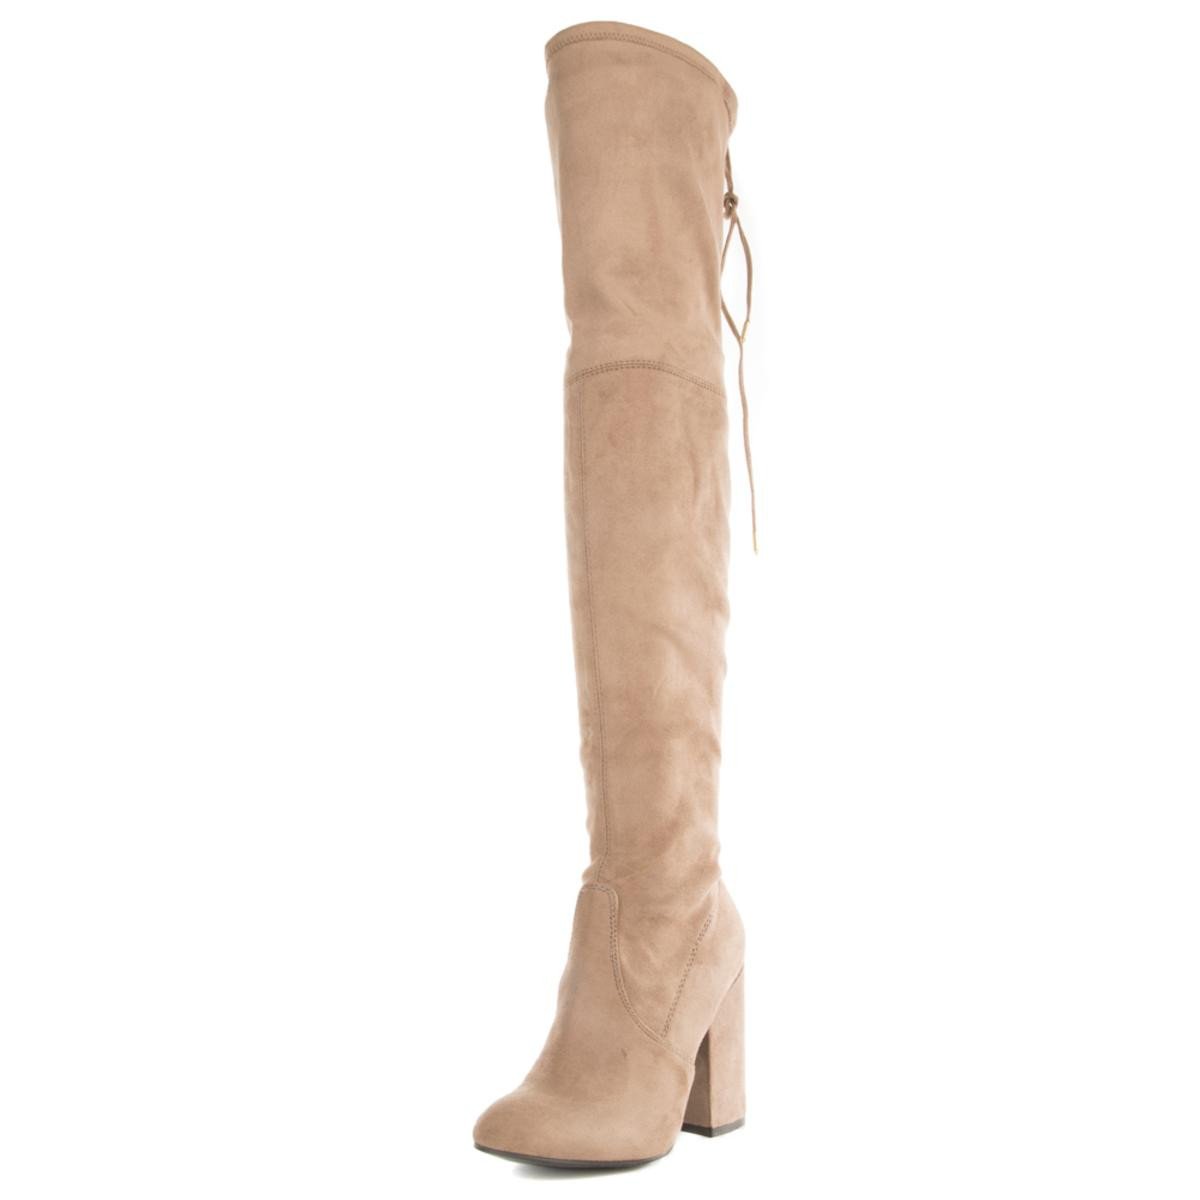 Steve Madden for Women: Norri Taupe Thigh High Heeled Boots